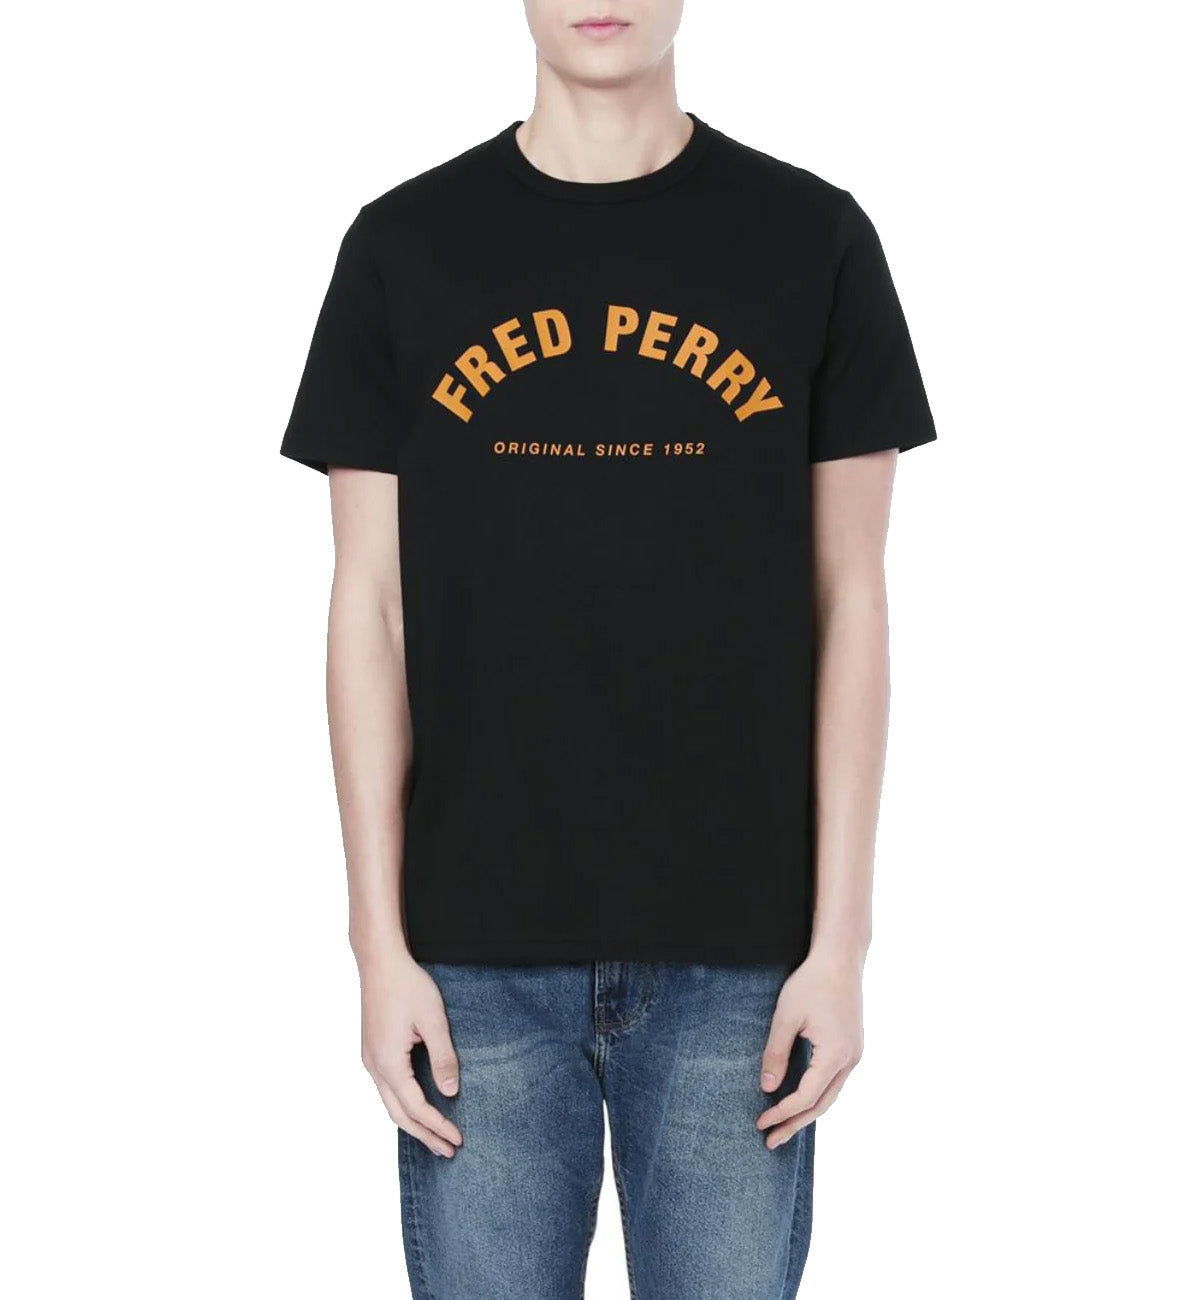 Fred Perry Arch Branded T-Shirt (Black)